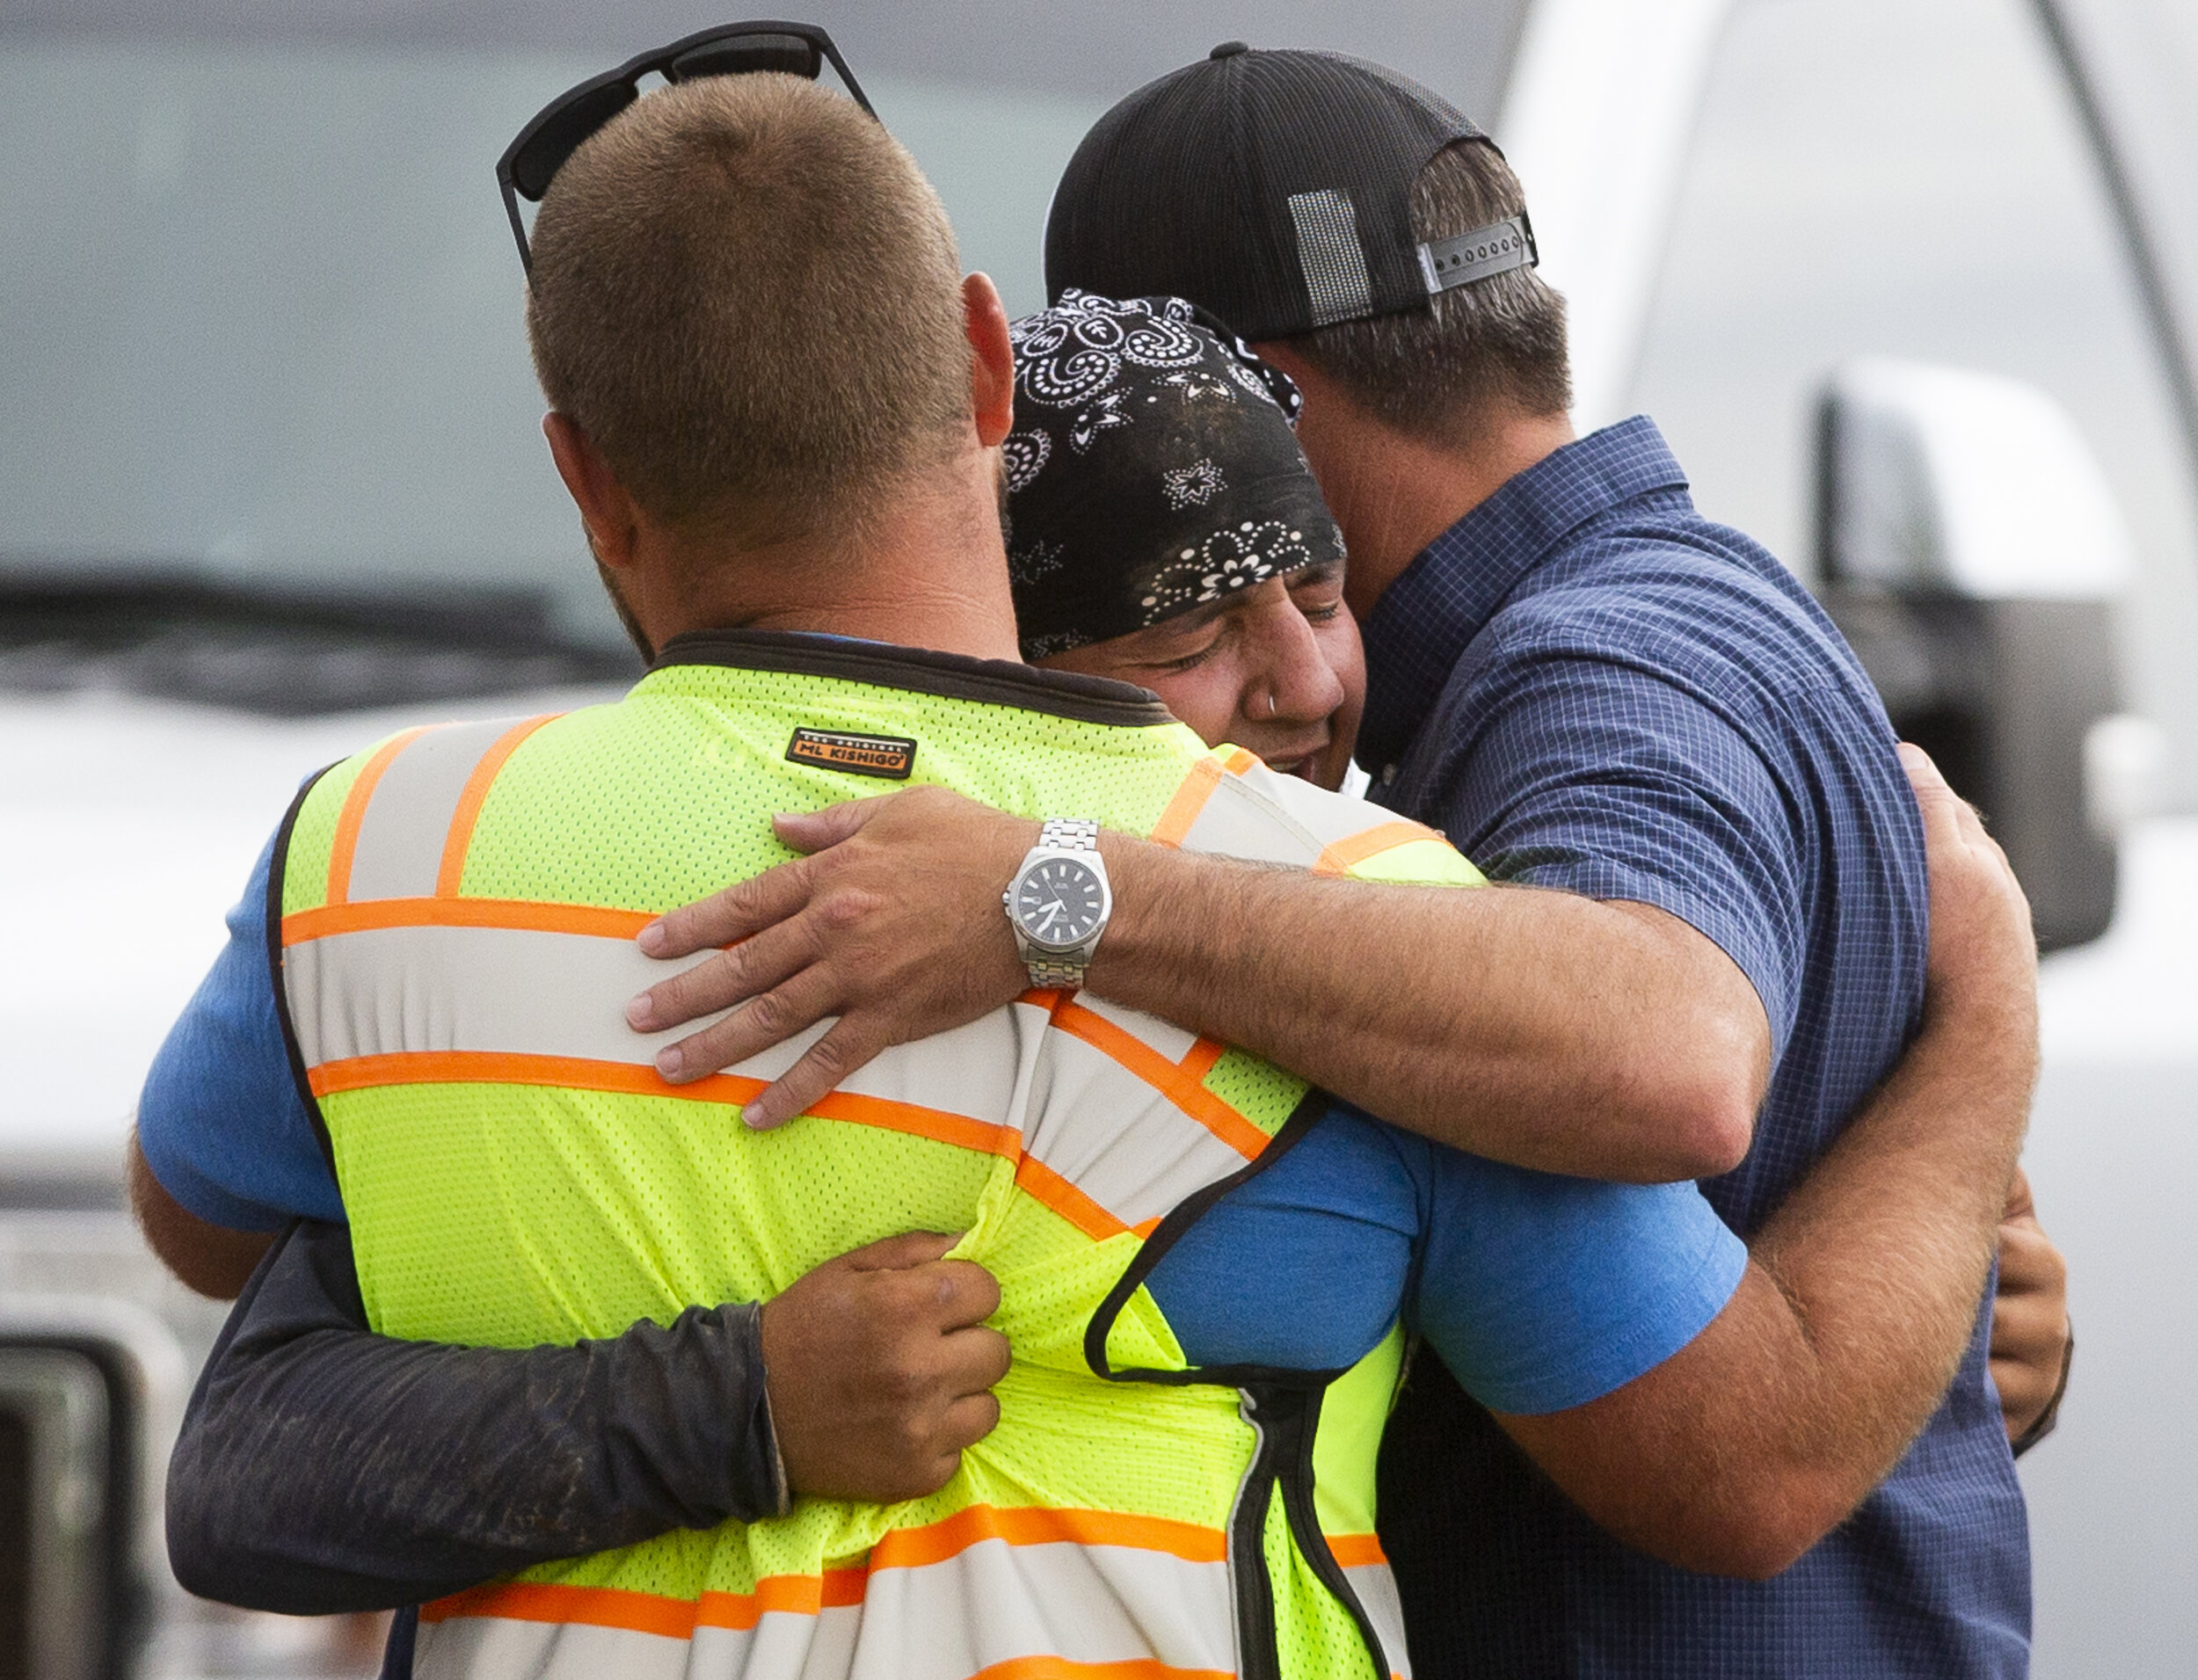  Construction worker Mario Nodal (center) embraces two coworkers after learning his uncle died alongside another worker who died at the site of a trench collapse near north 109th avenue and west Marshall avenue in Phoenix, Ariz.  